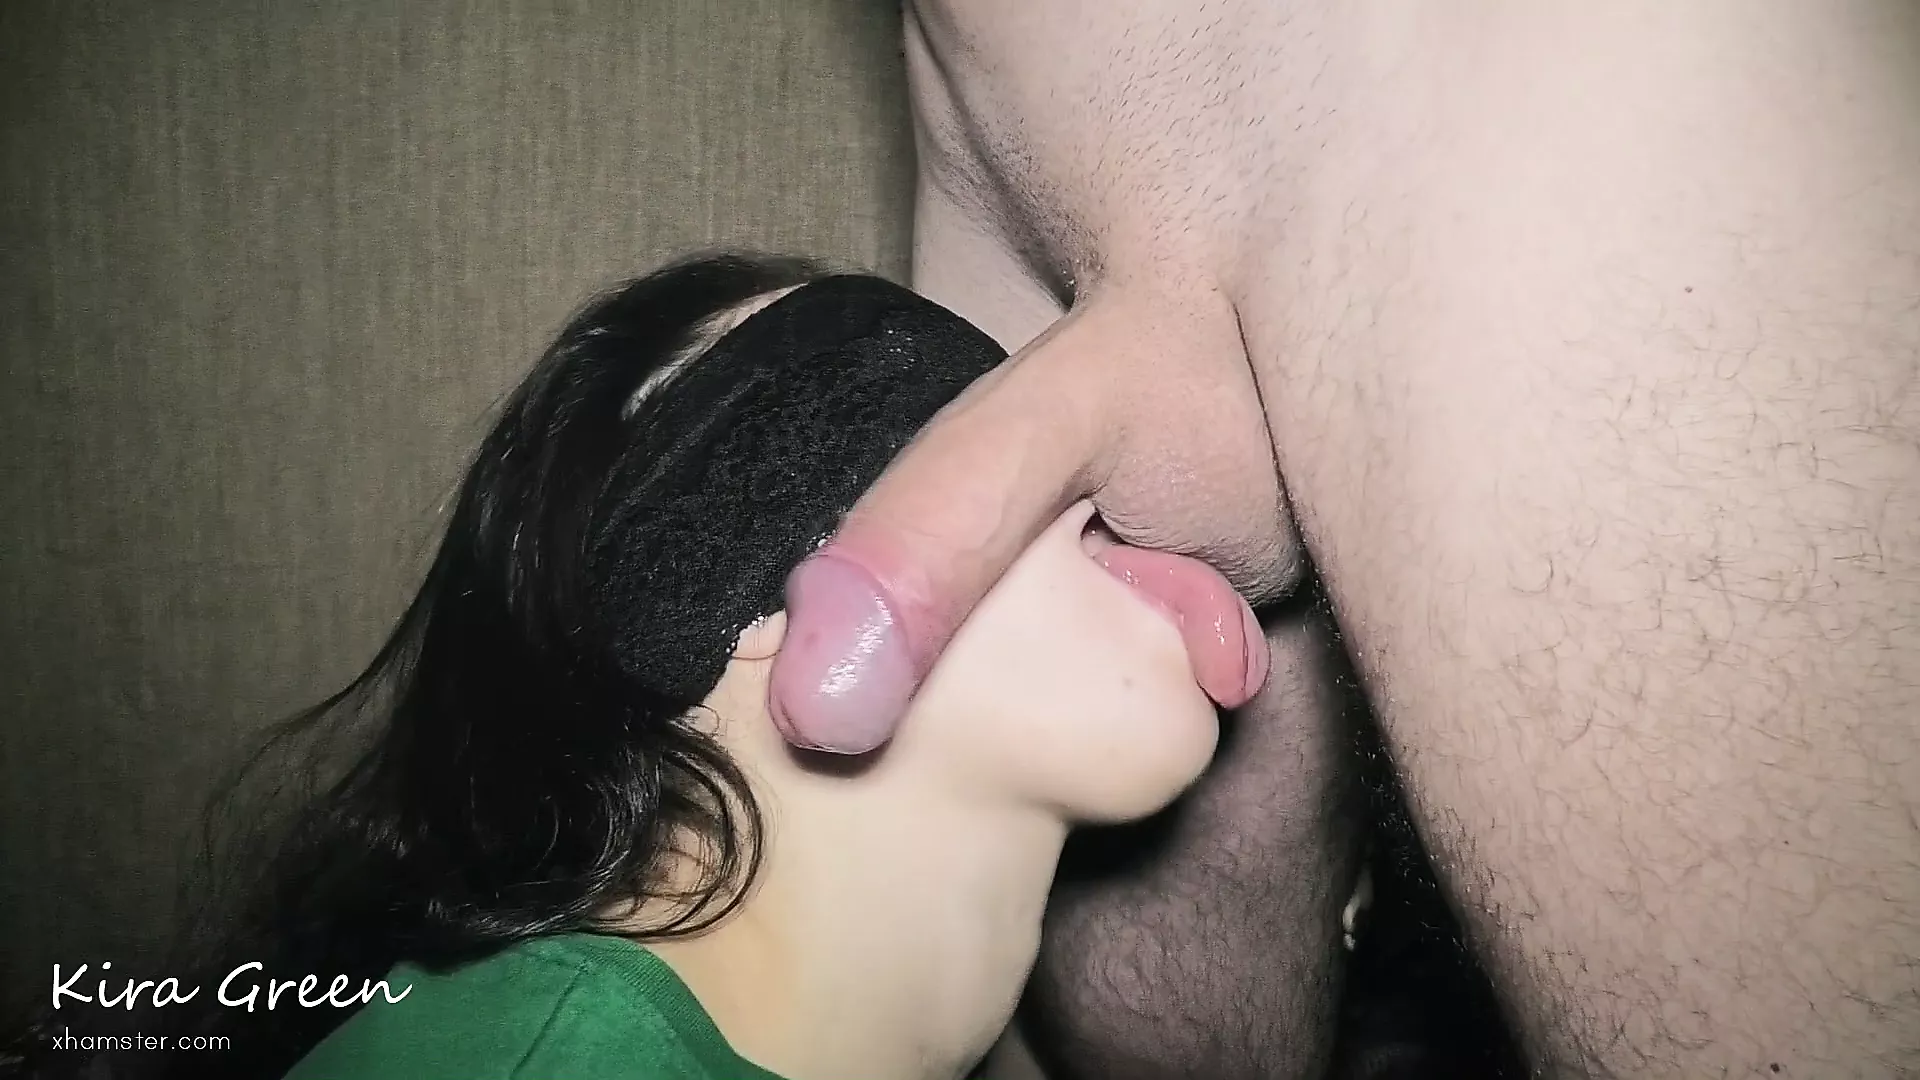 Blowjob and Rimming, licking and sucking balls, threesome image